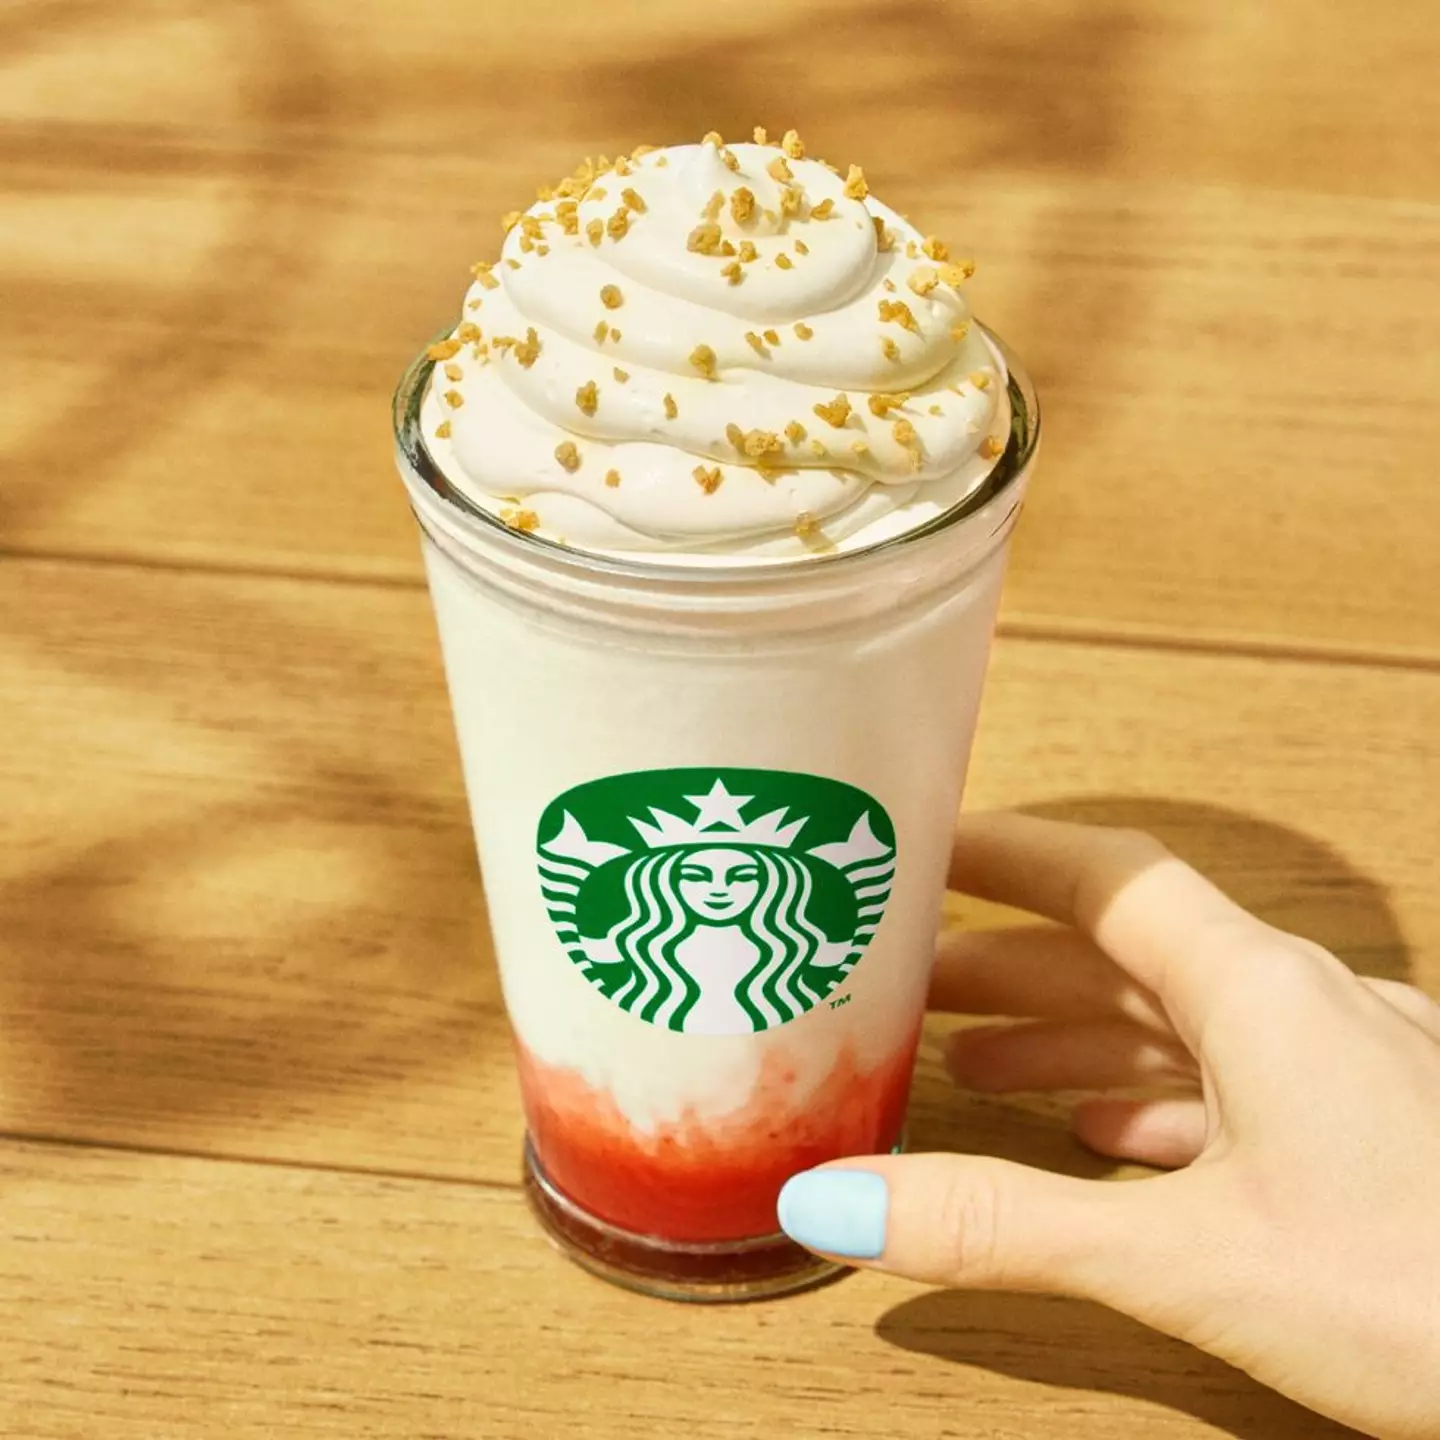 There's the Strawberry Wafflecone Frappuccino.